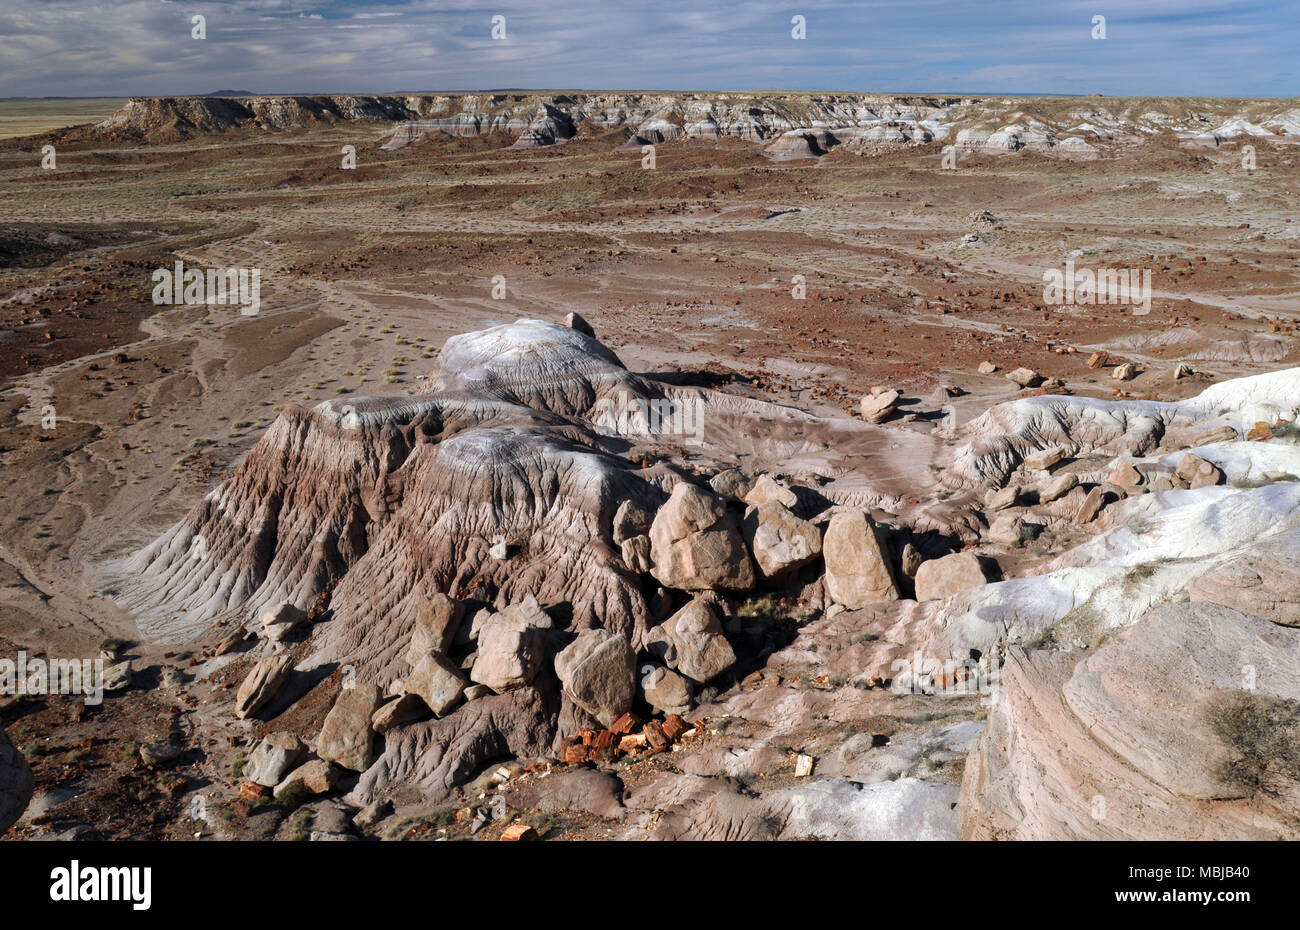 View from Jasper Forest overlook in Petrified Forest National Park, Arizona, showing multicoloured badlands and clusters of fossilized logs. Stock Photo